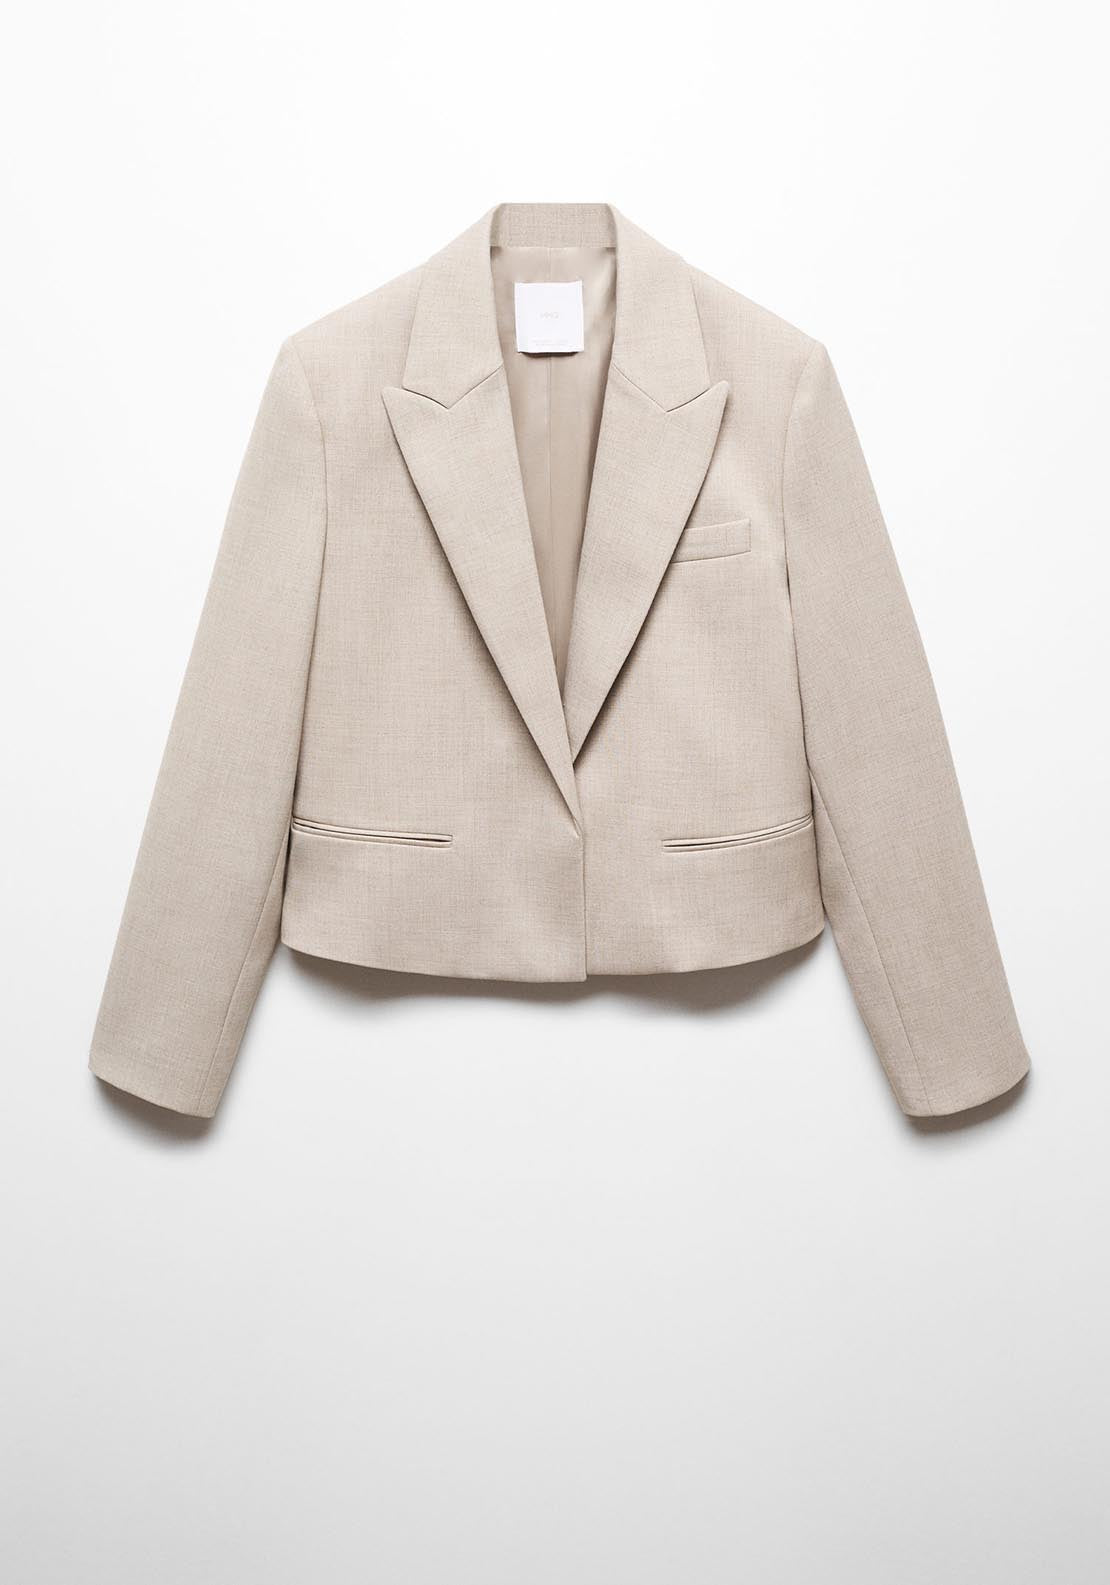 Mango Cropped blazer with button 6 Shaws Department Stores